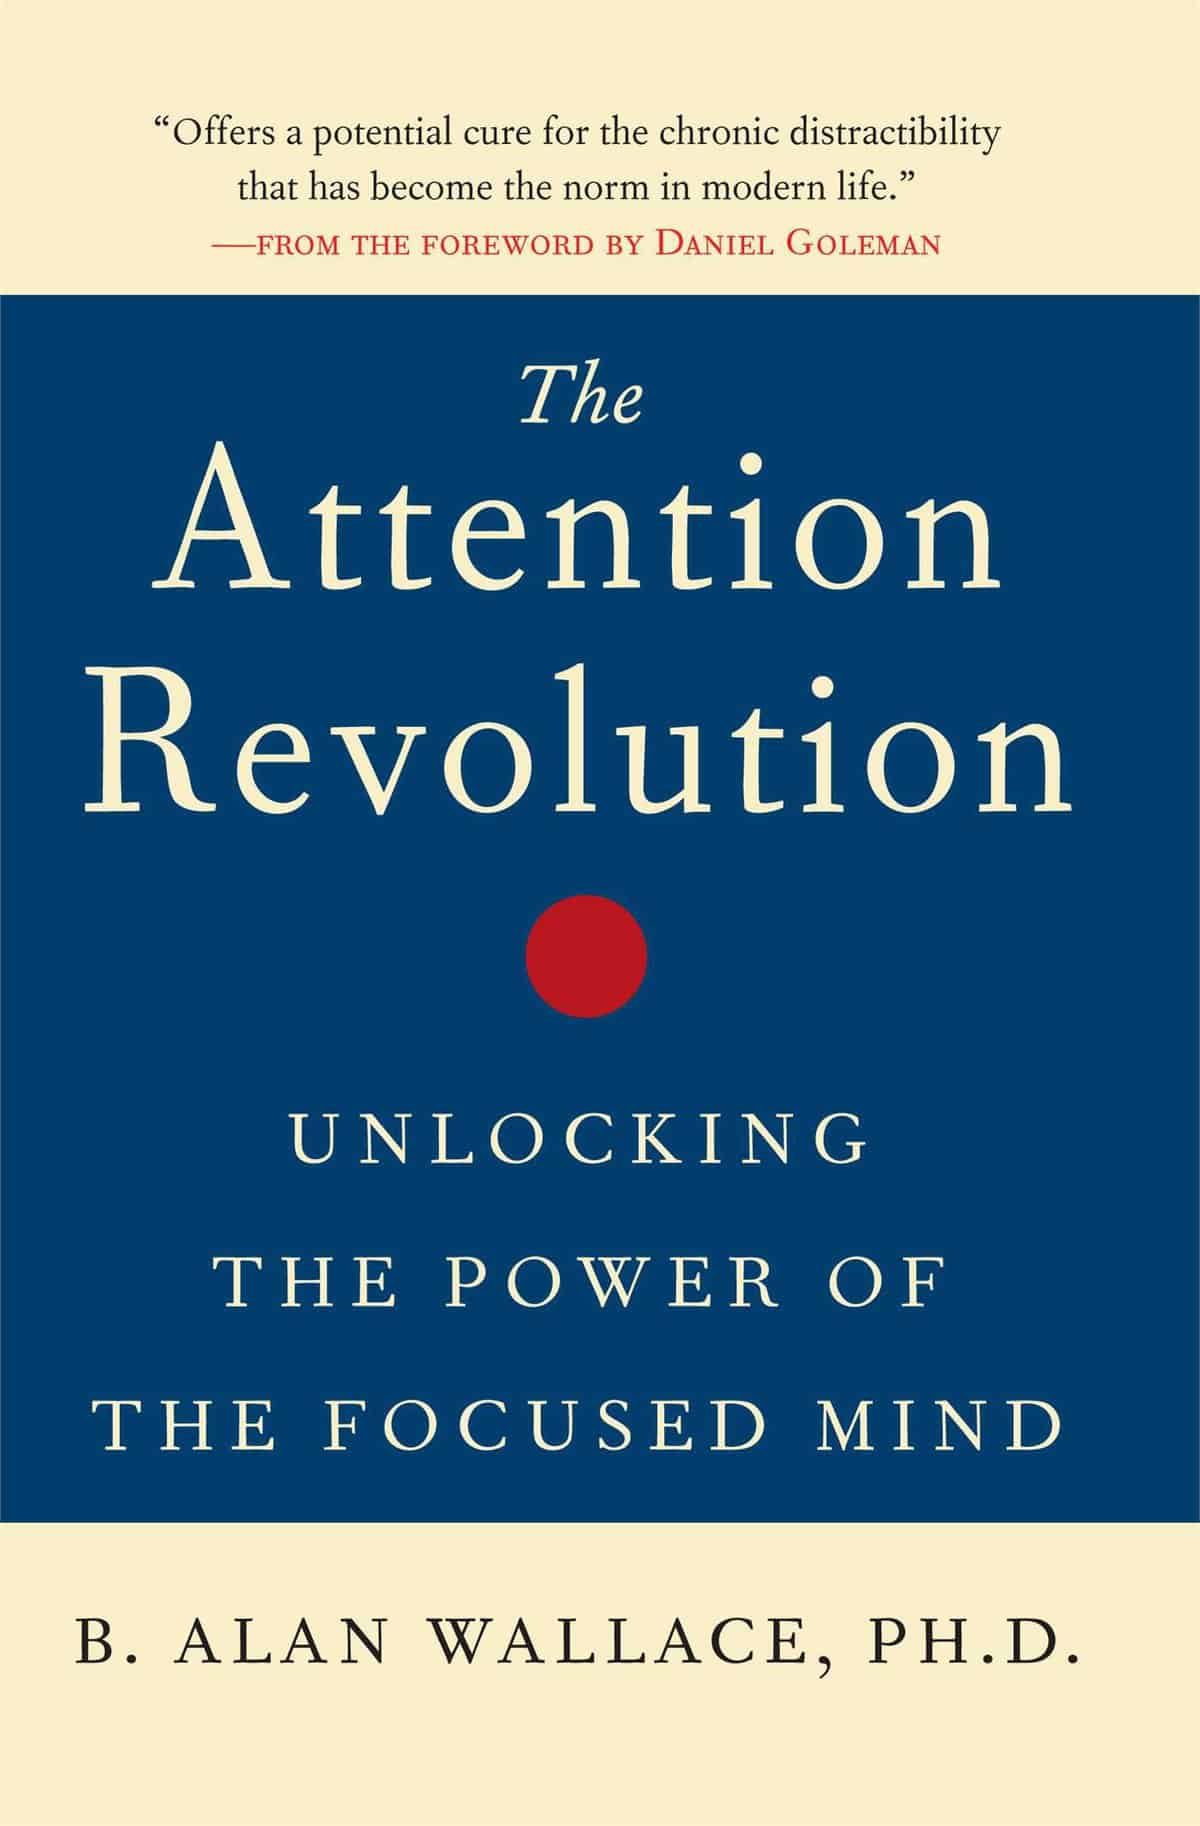 The Attention Revolution by Alan Wallace